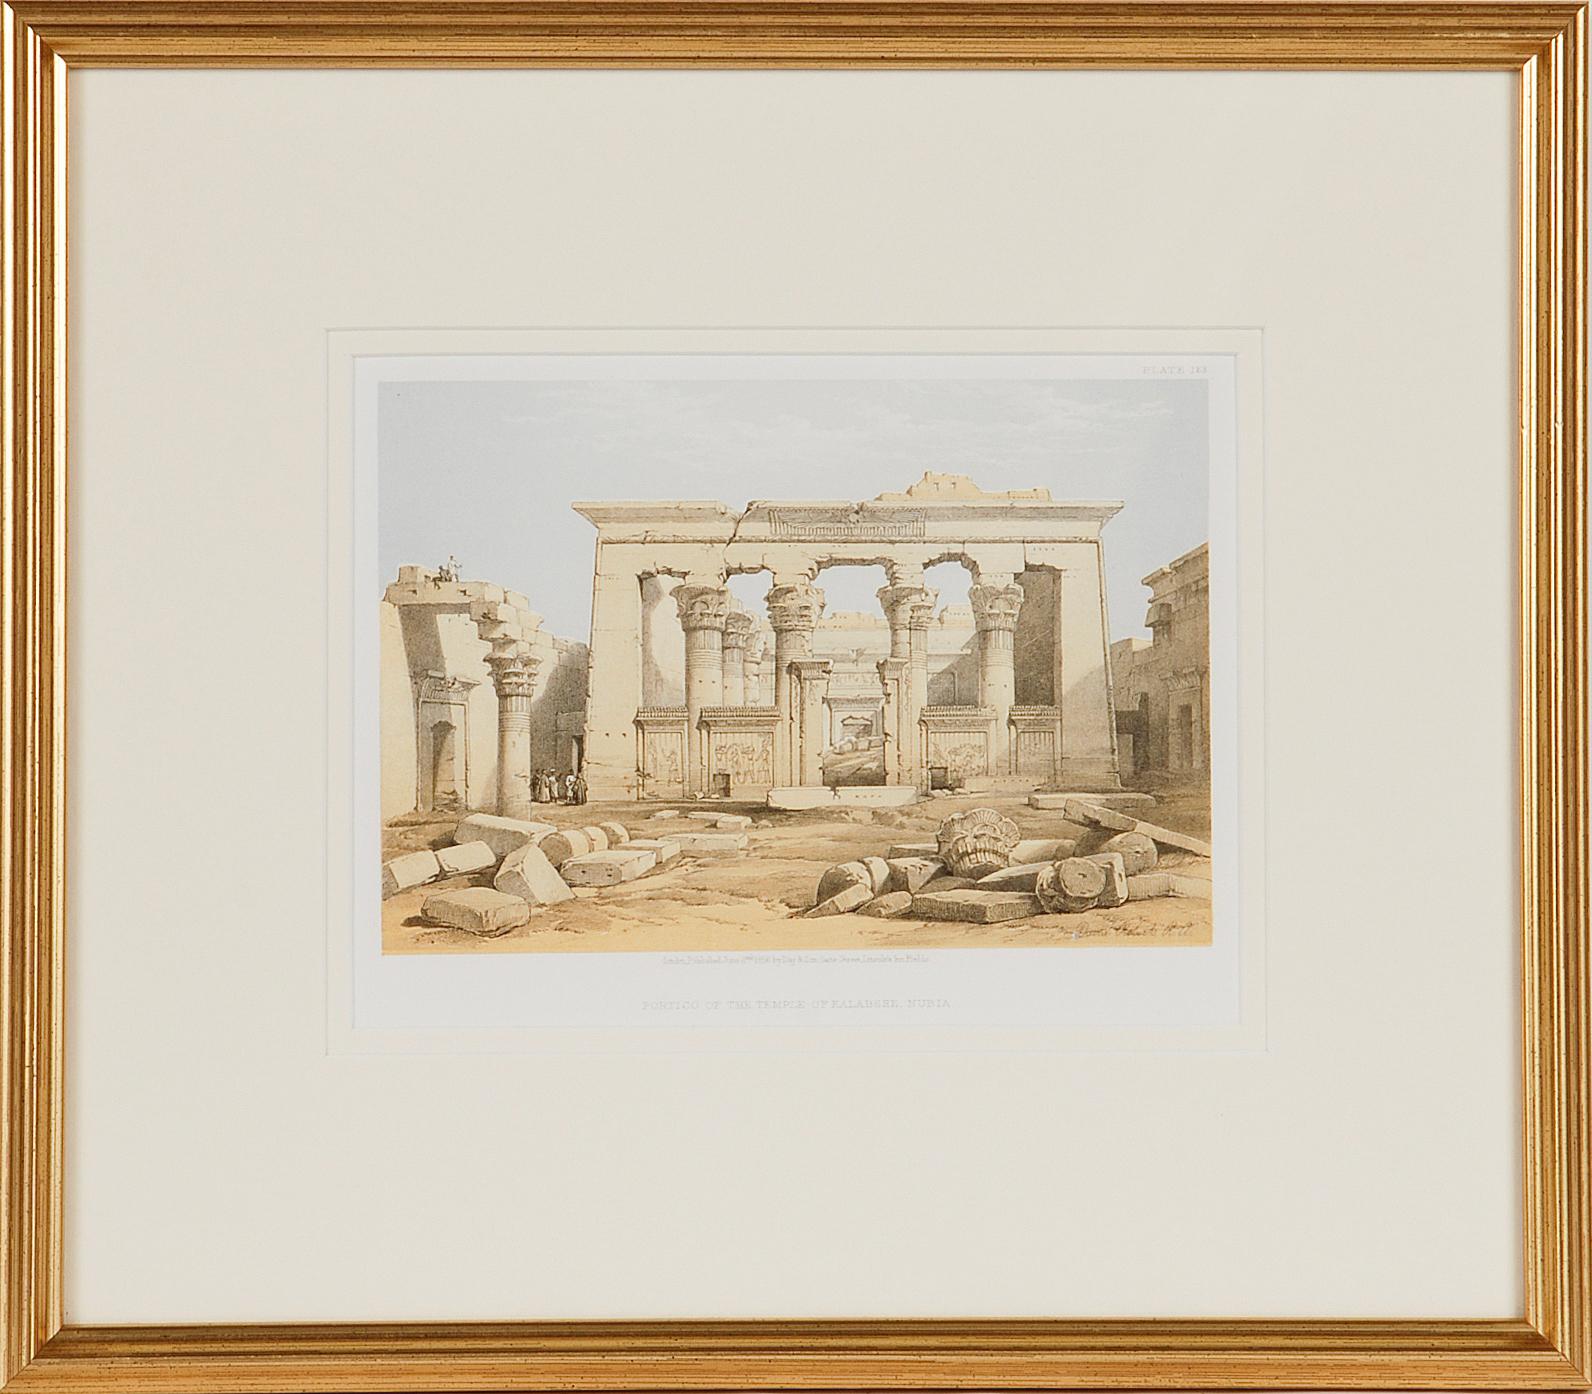 This is an original 19th century duotone lithograph entitled "Portico of the Temple of Kalabashe, Nubia" by David Roberts, from his Egypt, The Holy Land and Nubia volumes of the quarto edition, published in London by Day and Son in 1856. The